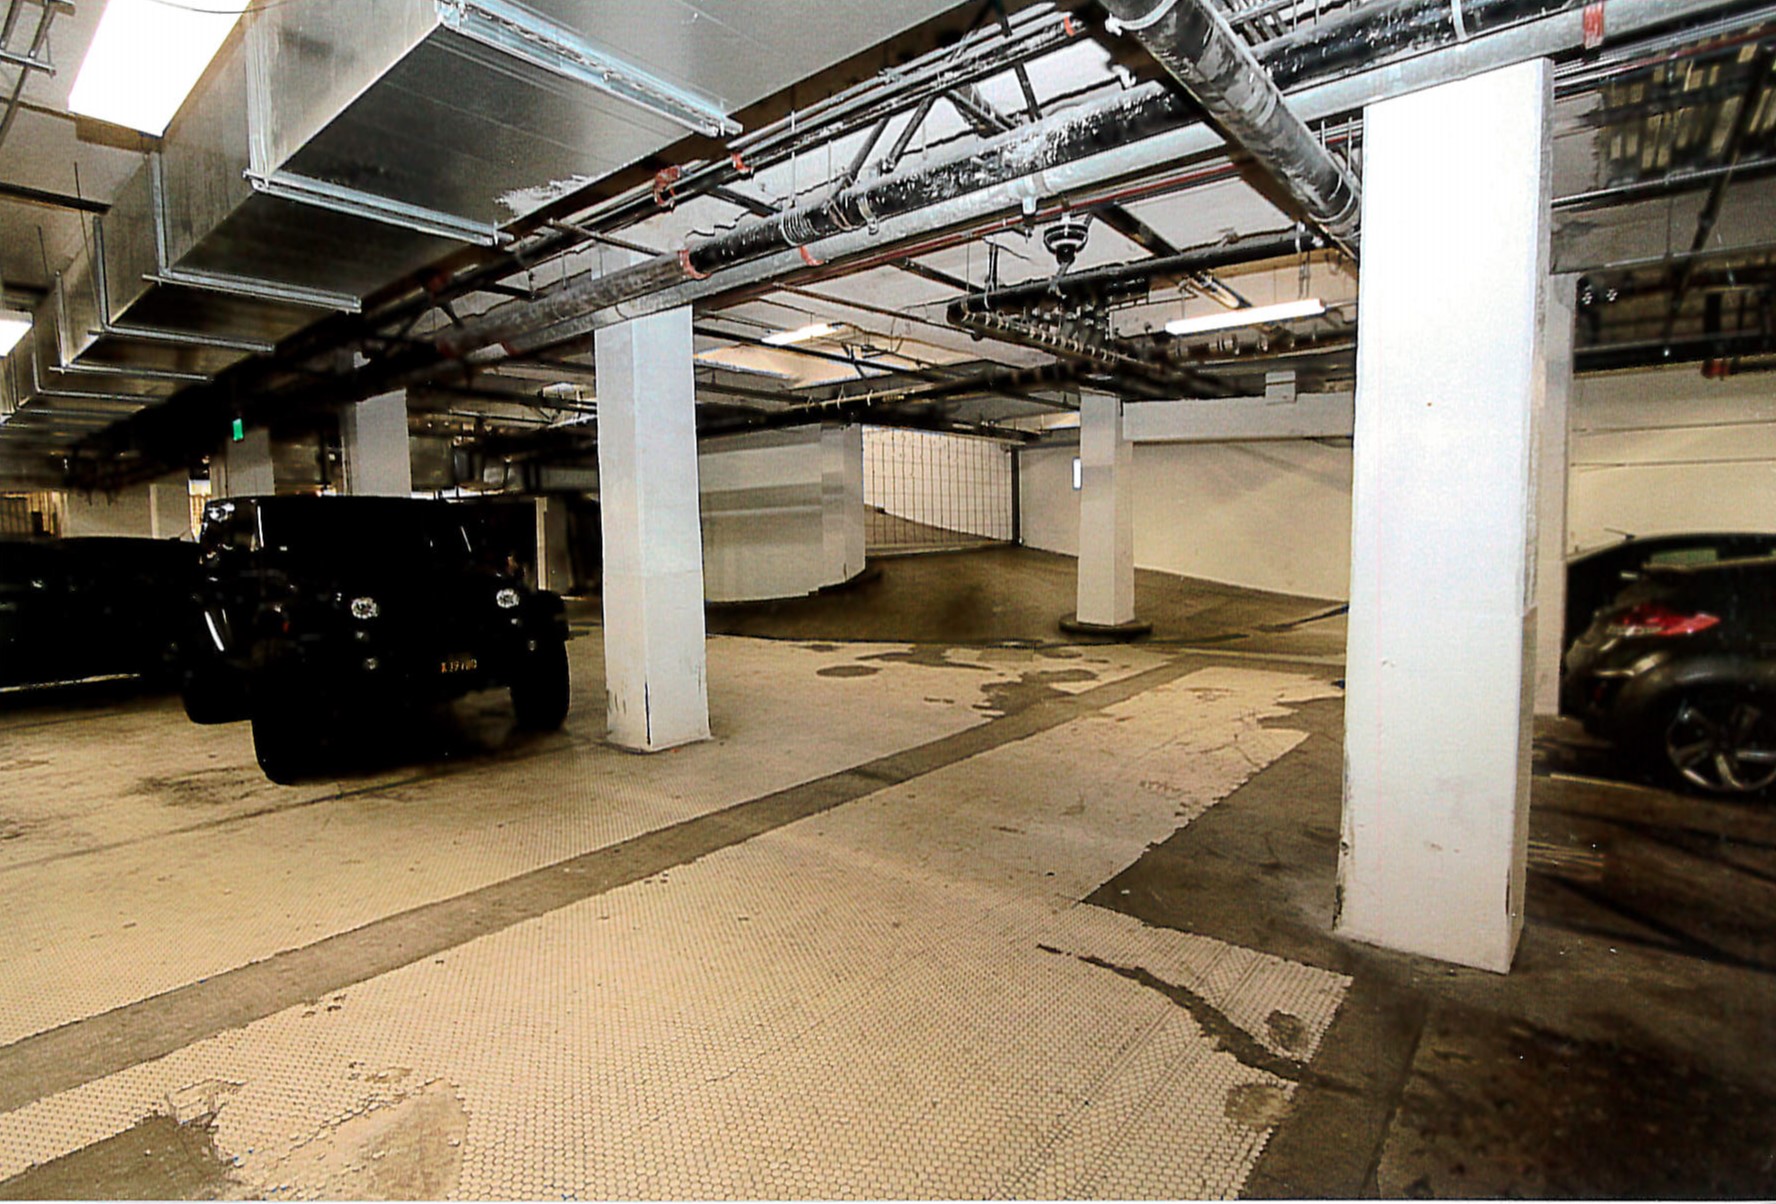 Rehabilitated basement parking garage, added pipework and security gate